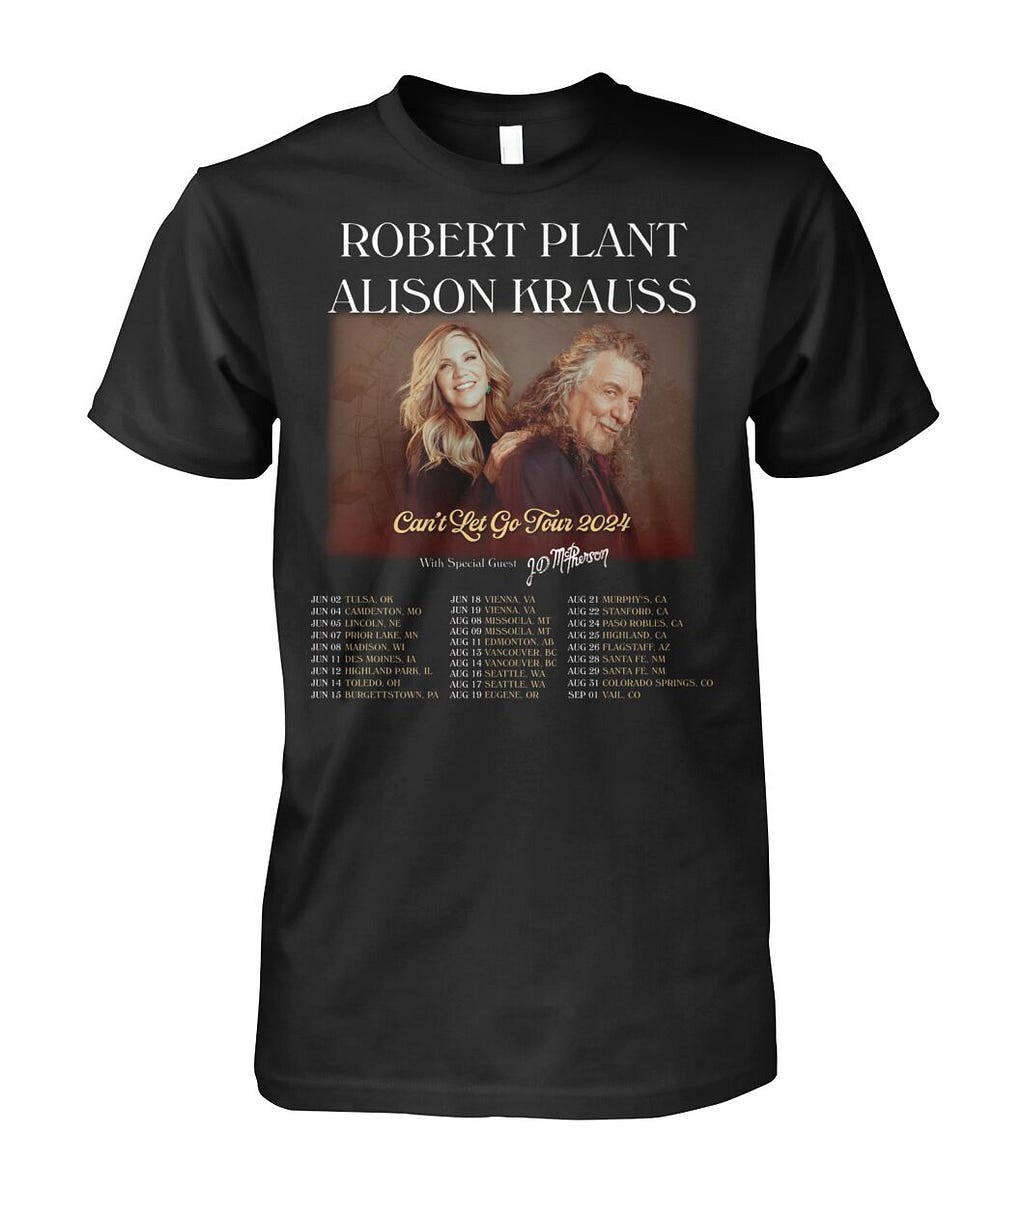 Robert Plant And Alison Krauss Can’t Let Go 2024 Tour Shirt